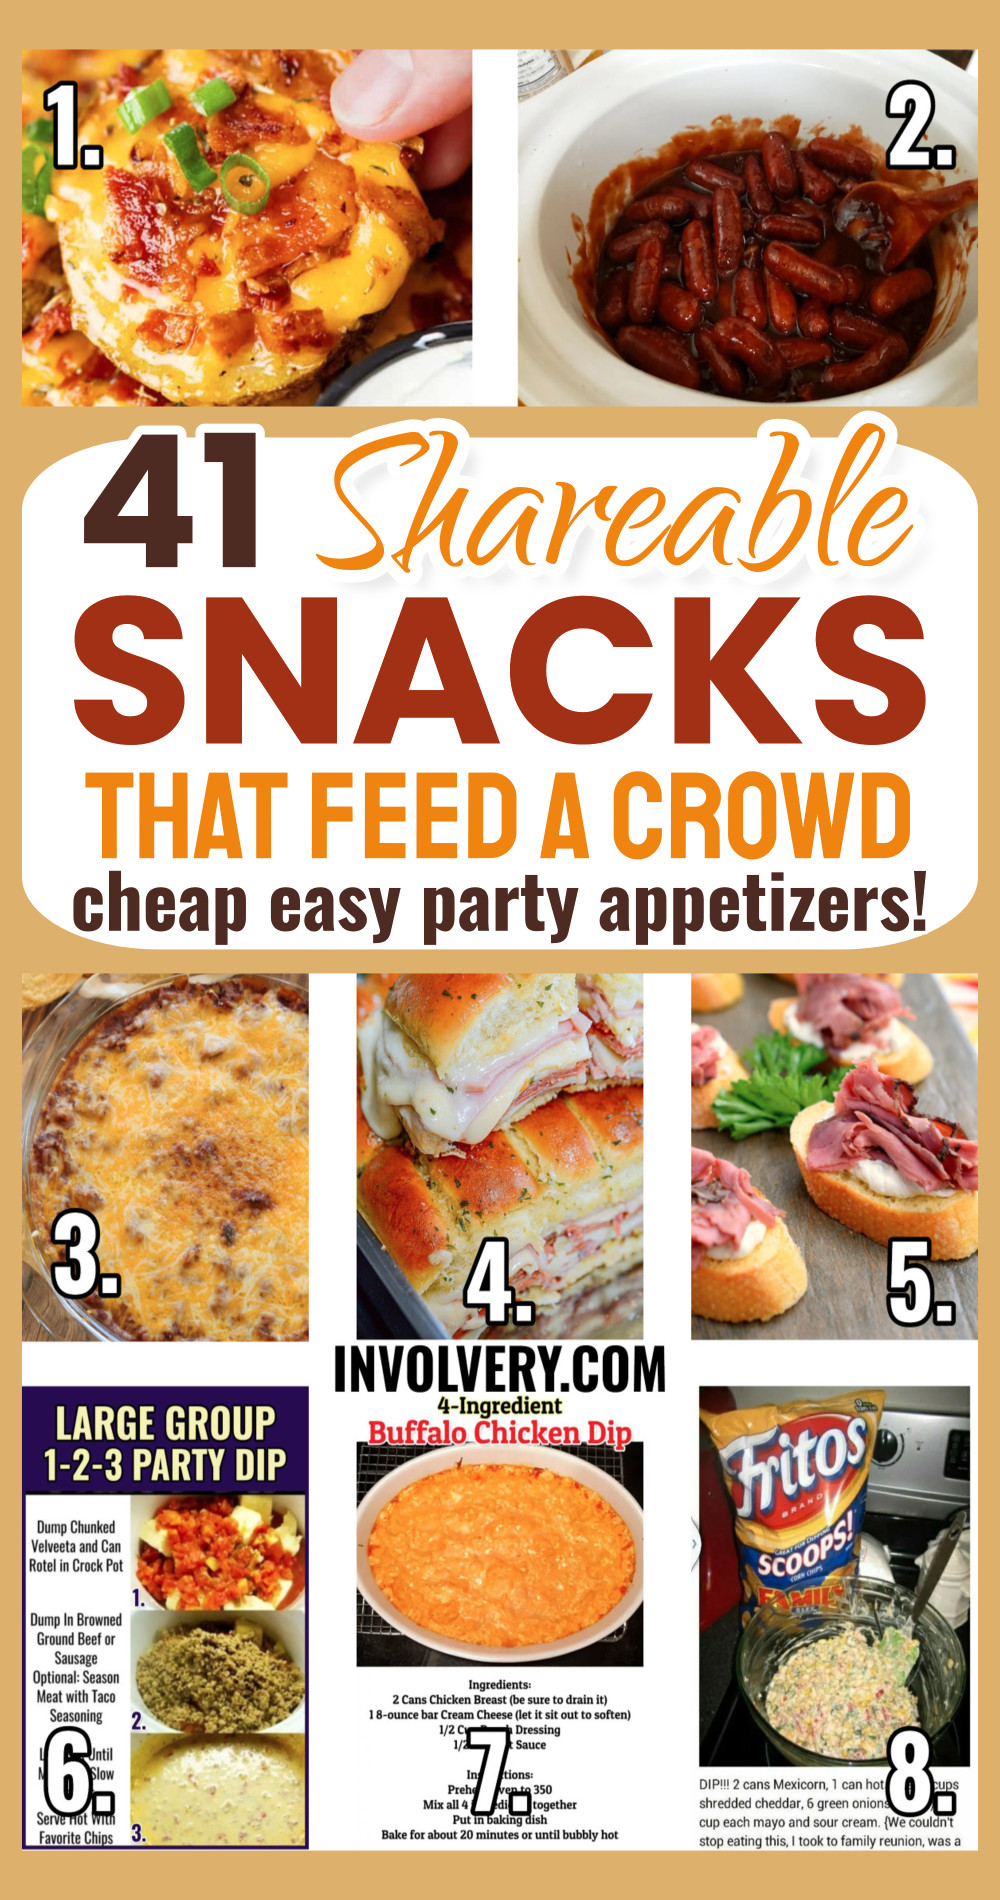 shareable snacks that feed a crowd cheap easy party appetizers